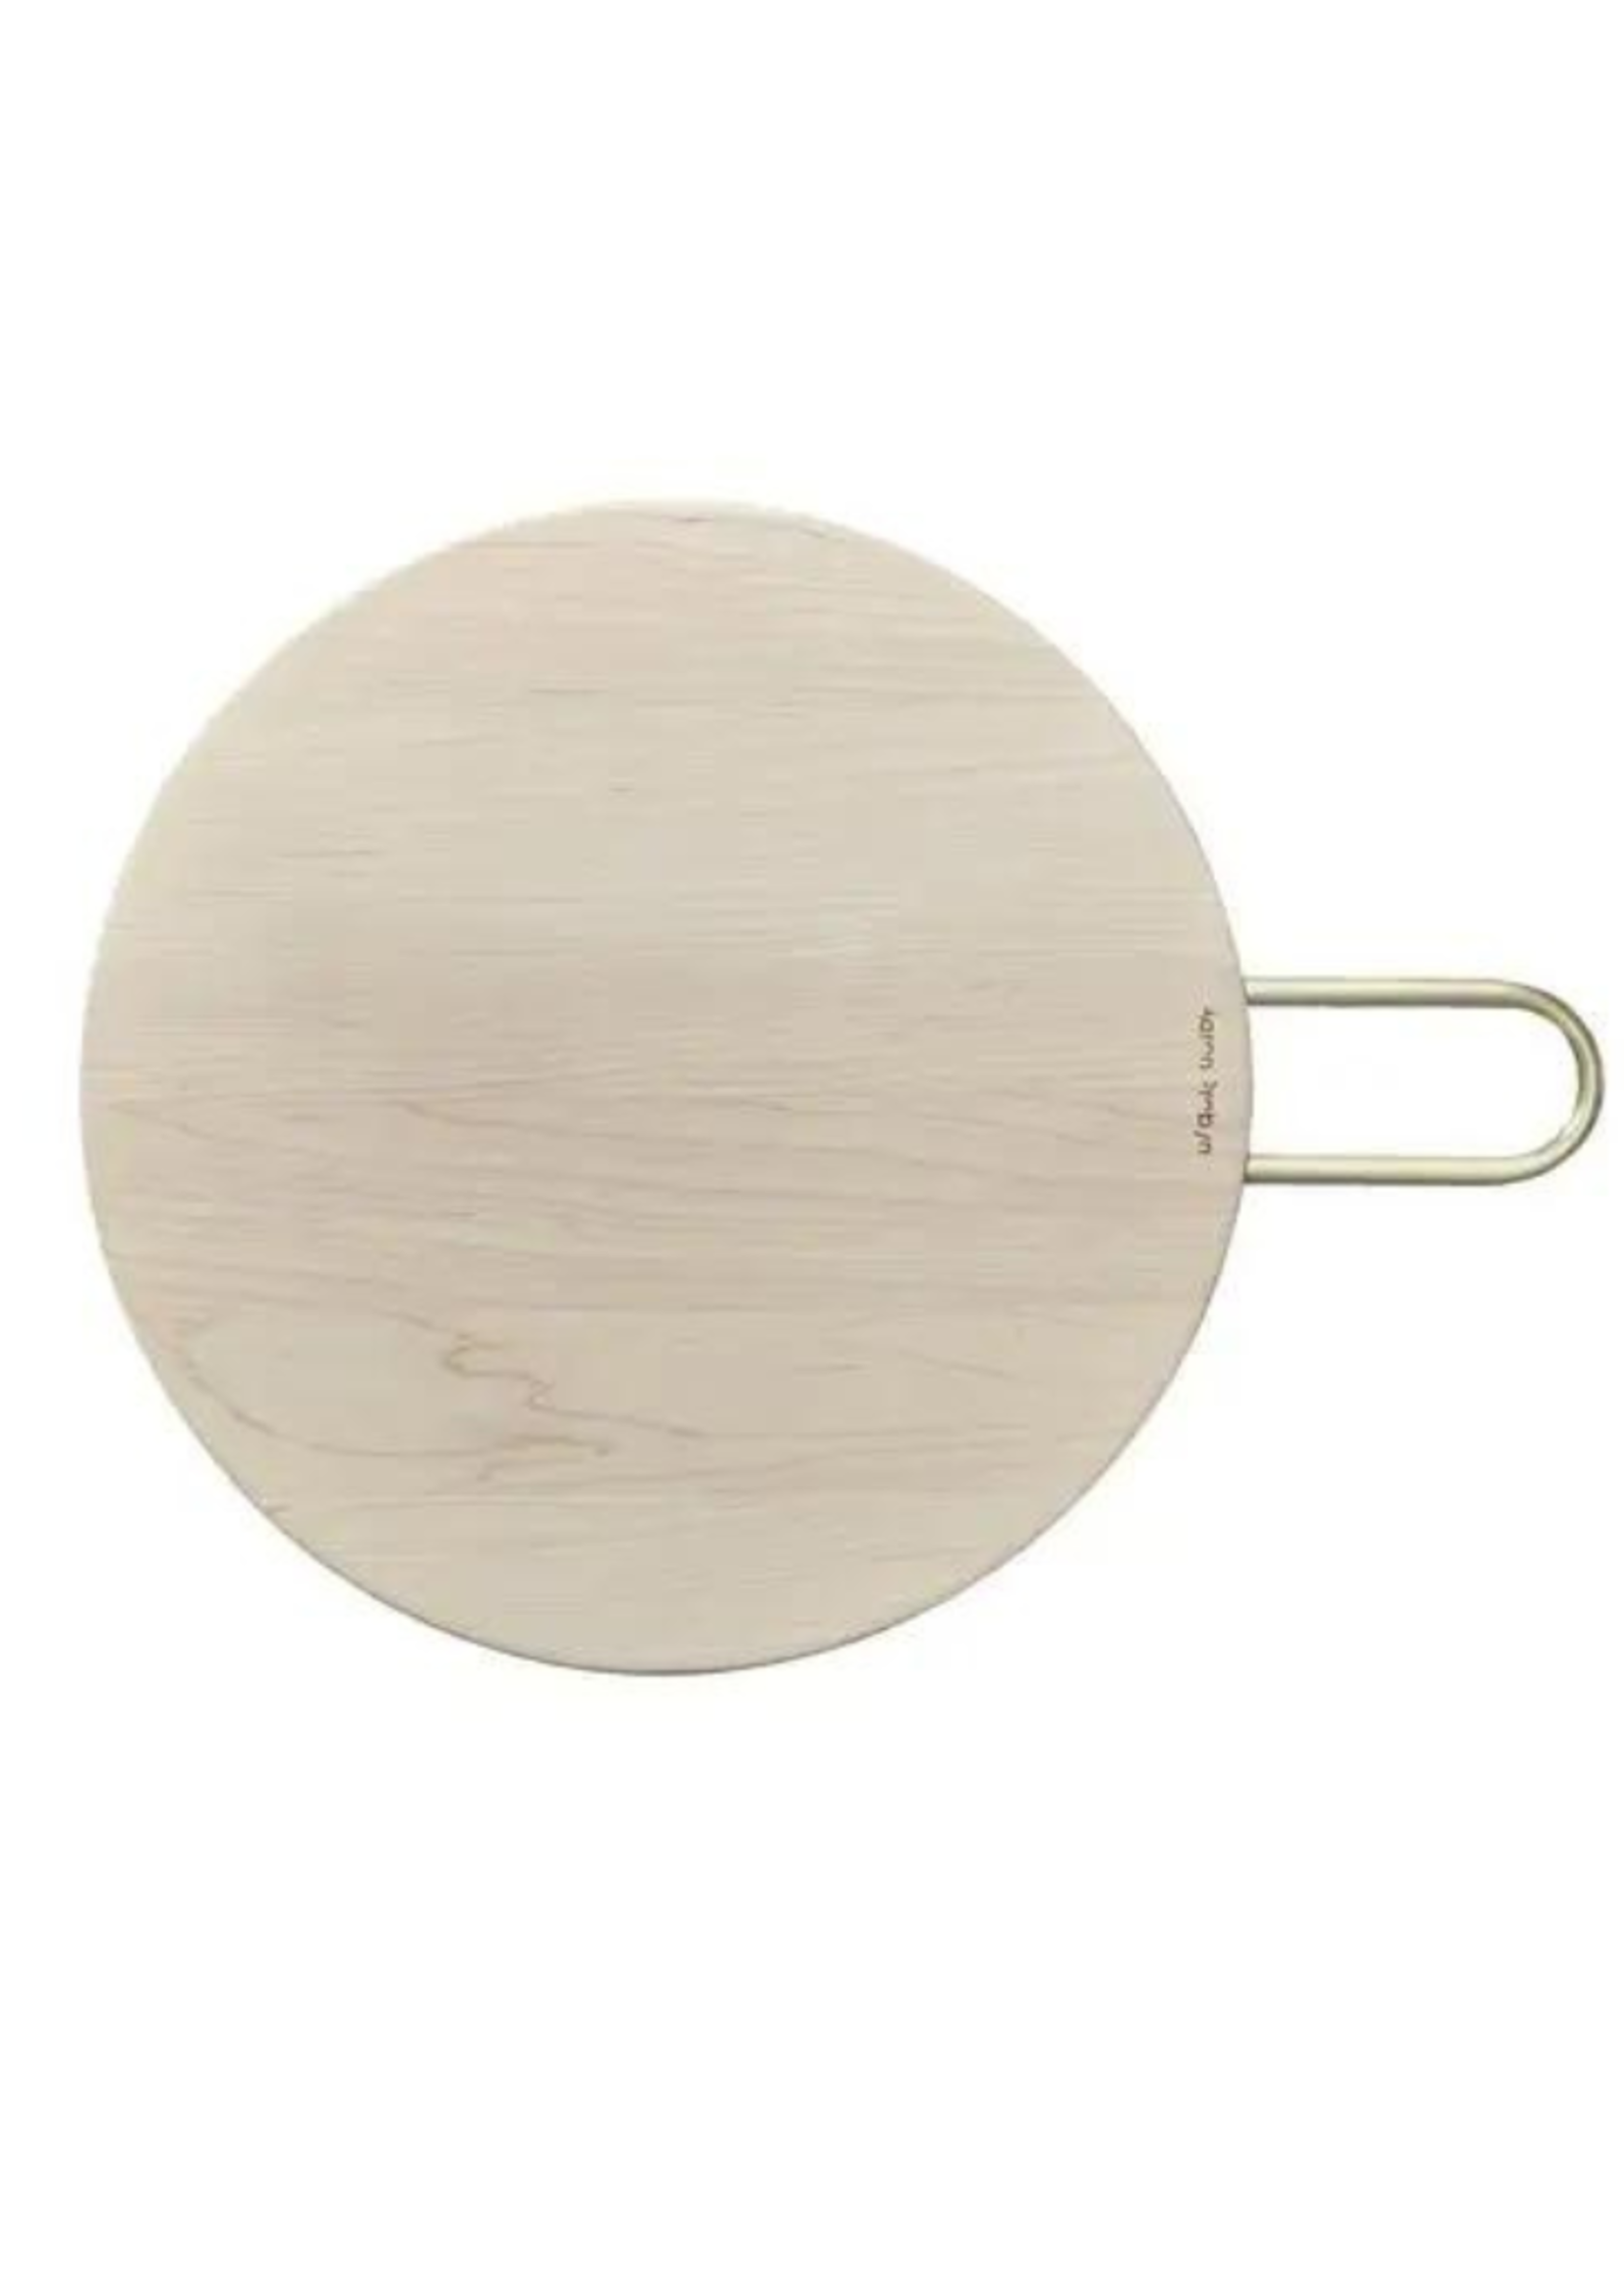 Aaron Probyn Maple Serving/Cutting/Chopping Board, Round